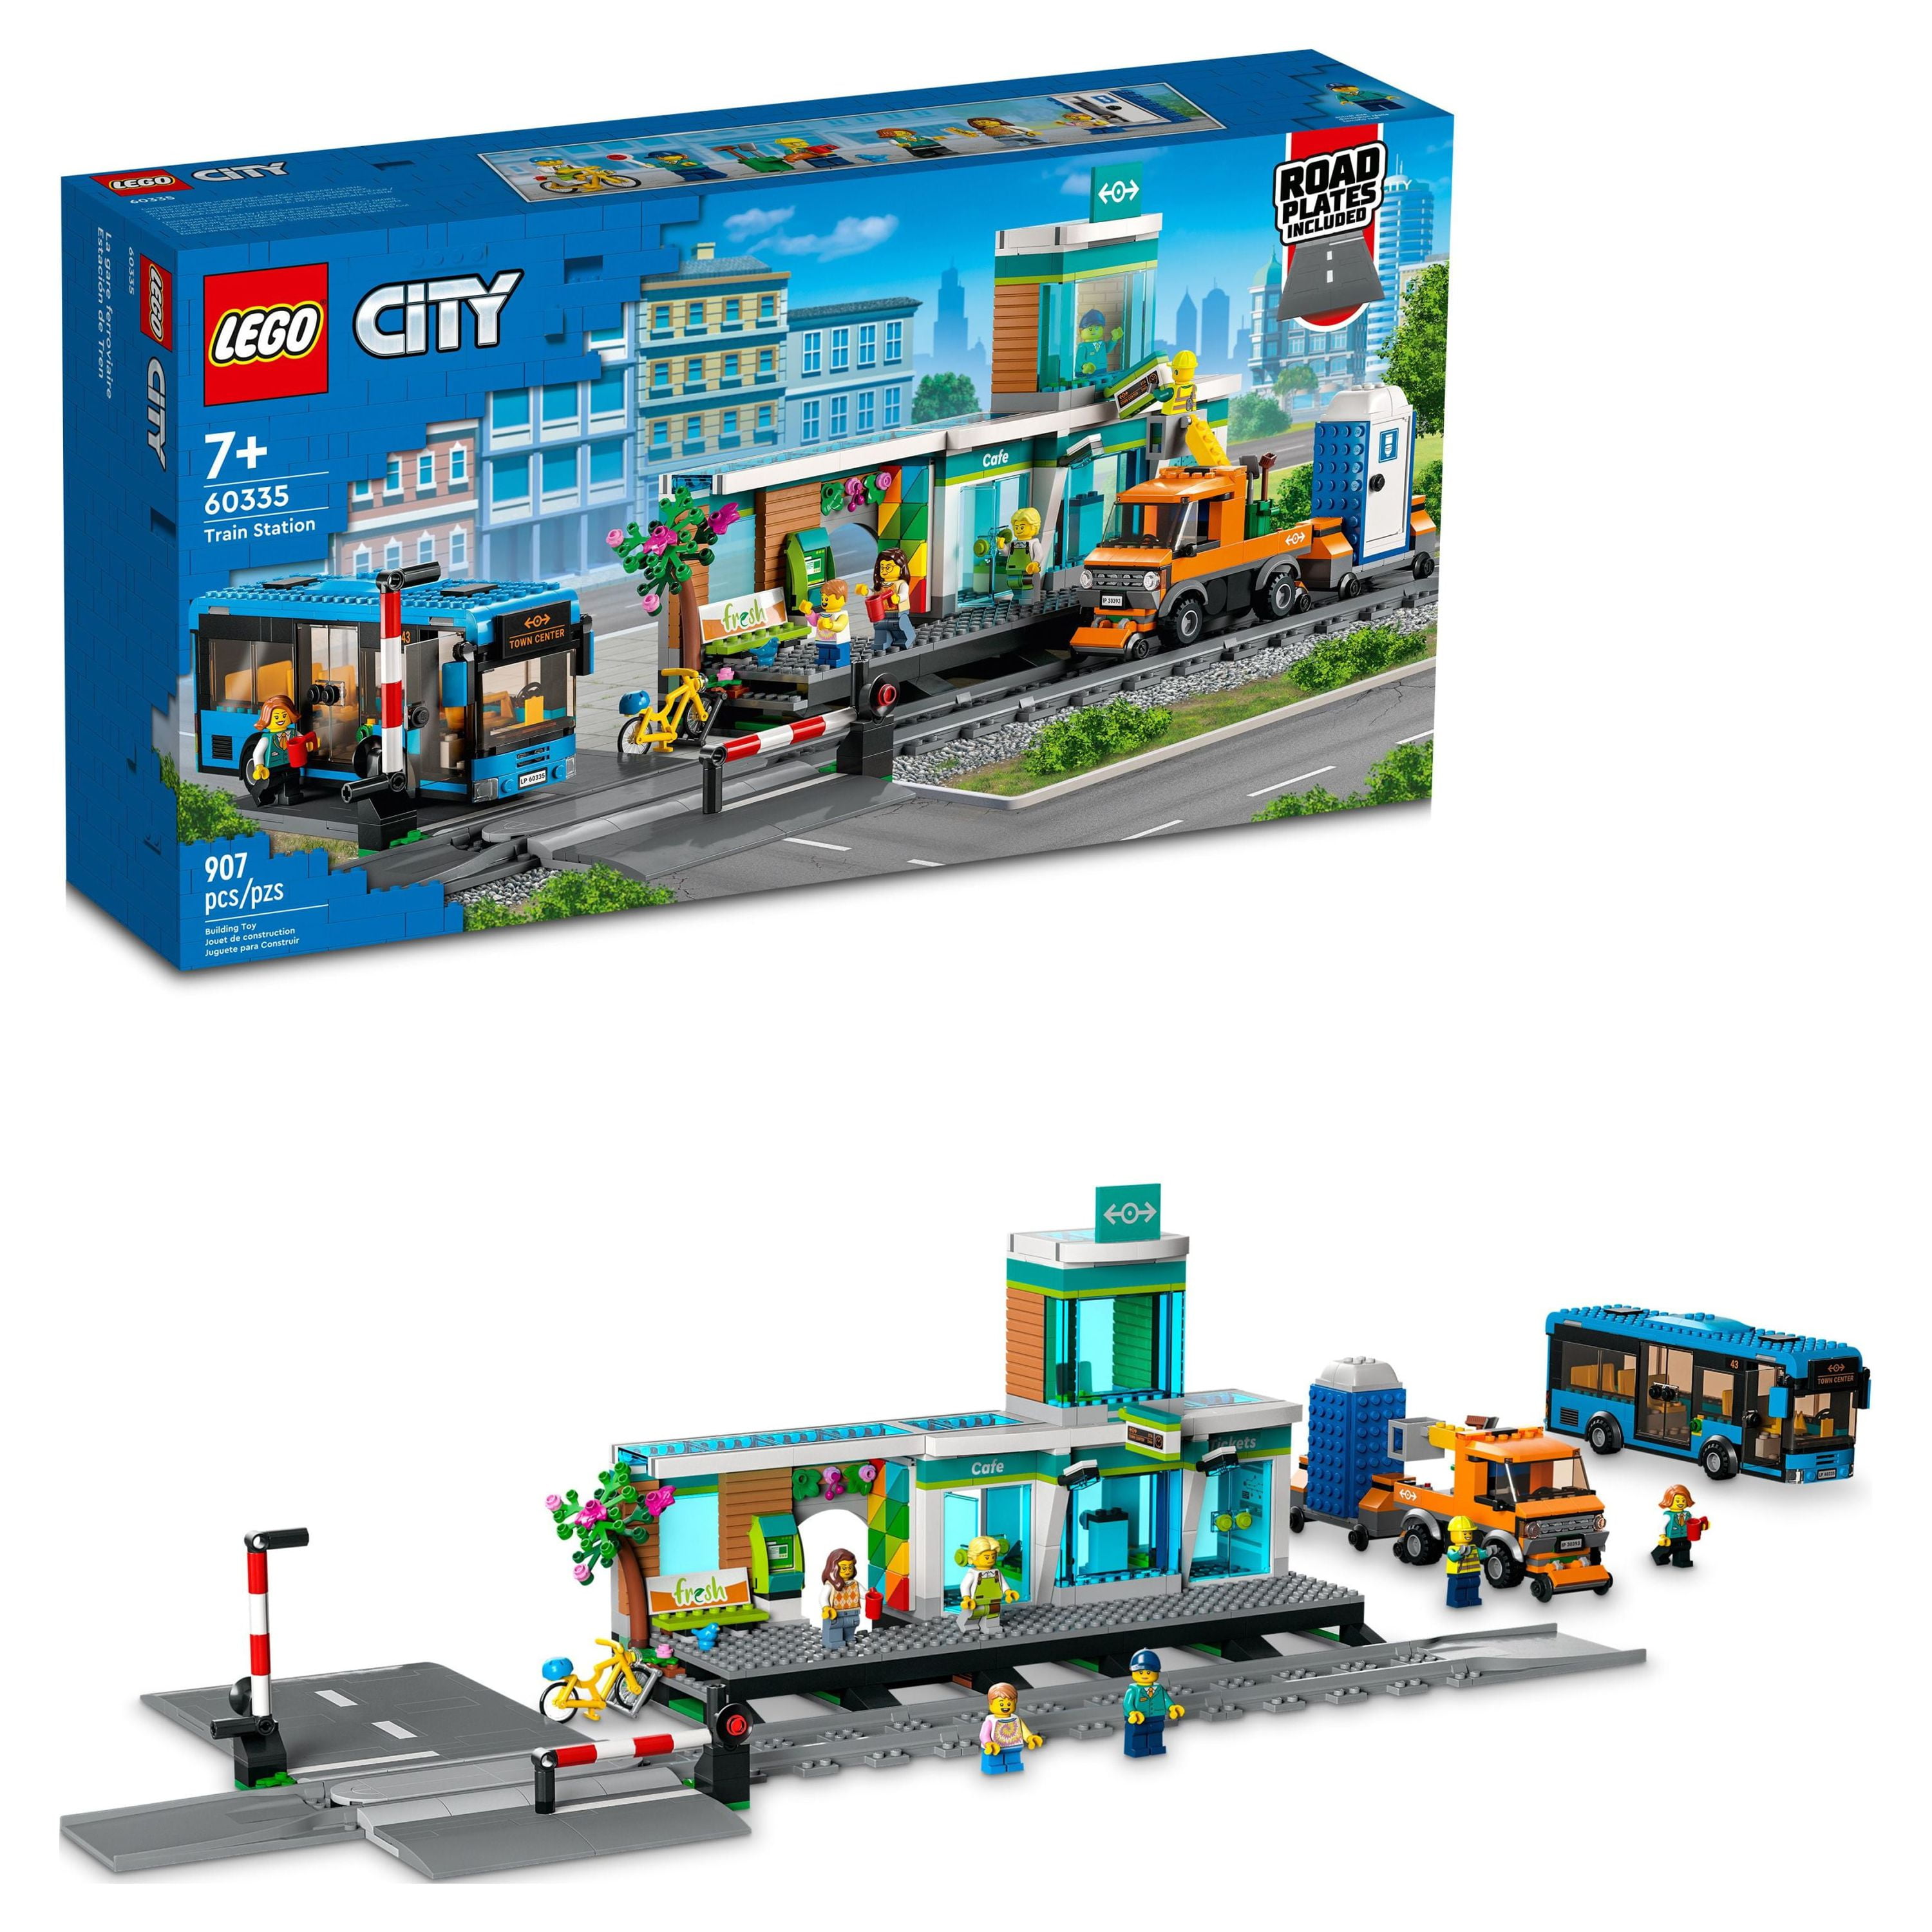 LEGO City Police Station with Van, Garbage Truck & Helicopter Toy